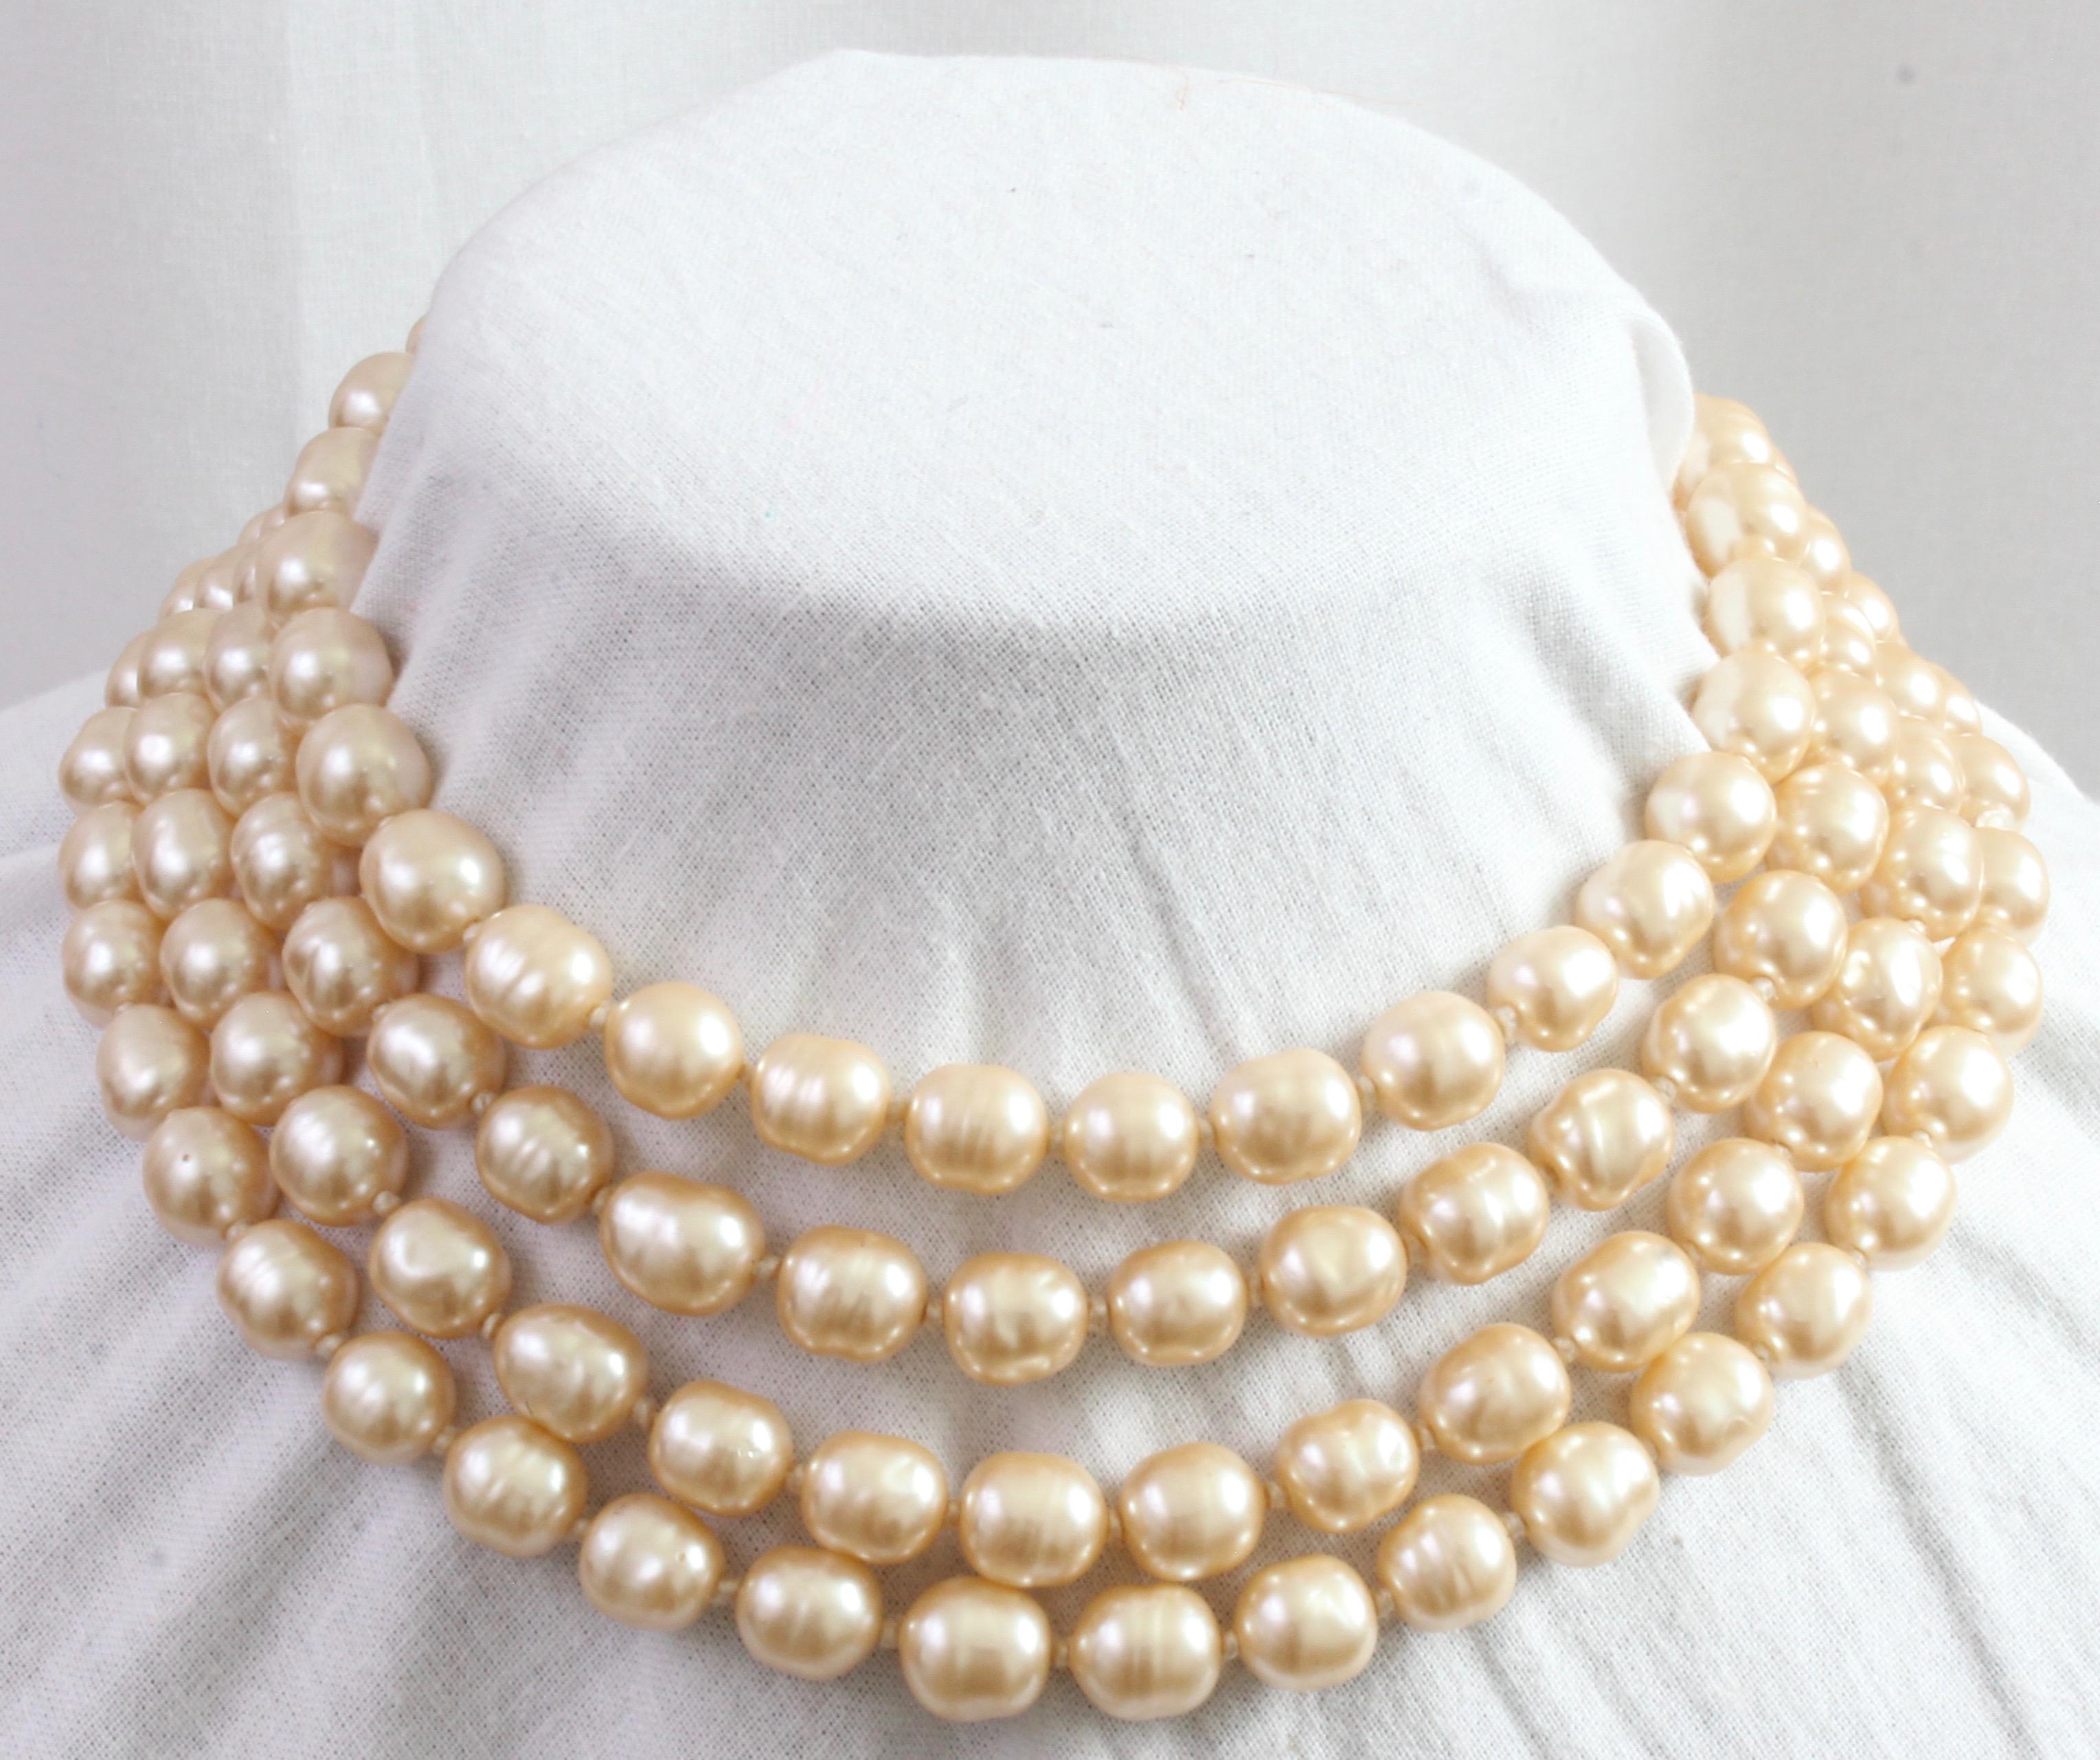 Here's an amazing single pearl strand infinity or opera length necklace from CHANEL that measures 65in long, enabling doubling or even tripling on the neck, depending upon neck size.  The color is a gold hued cream, which makes for a lovely contrast